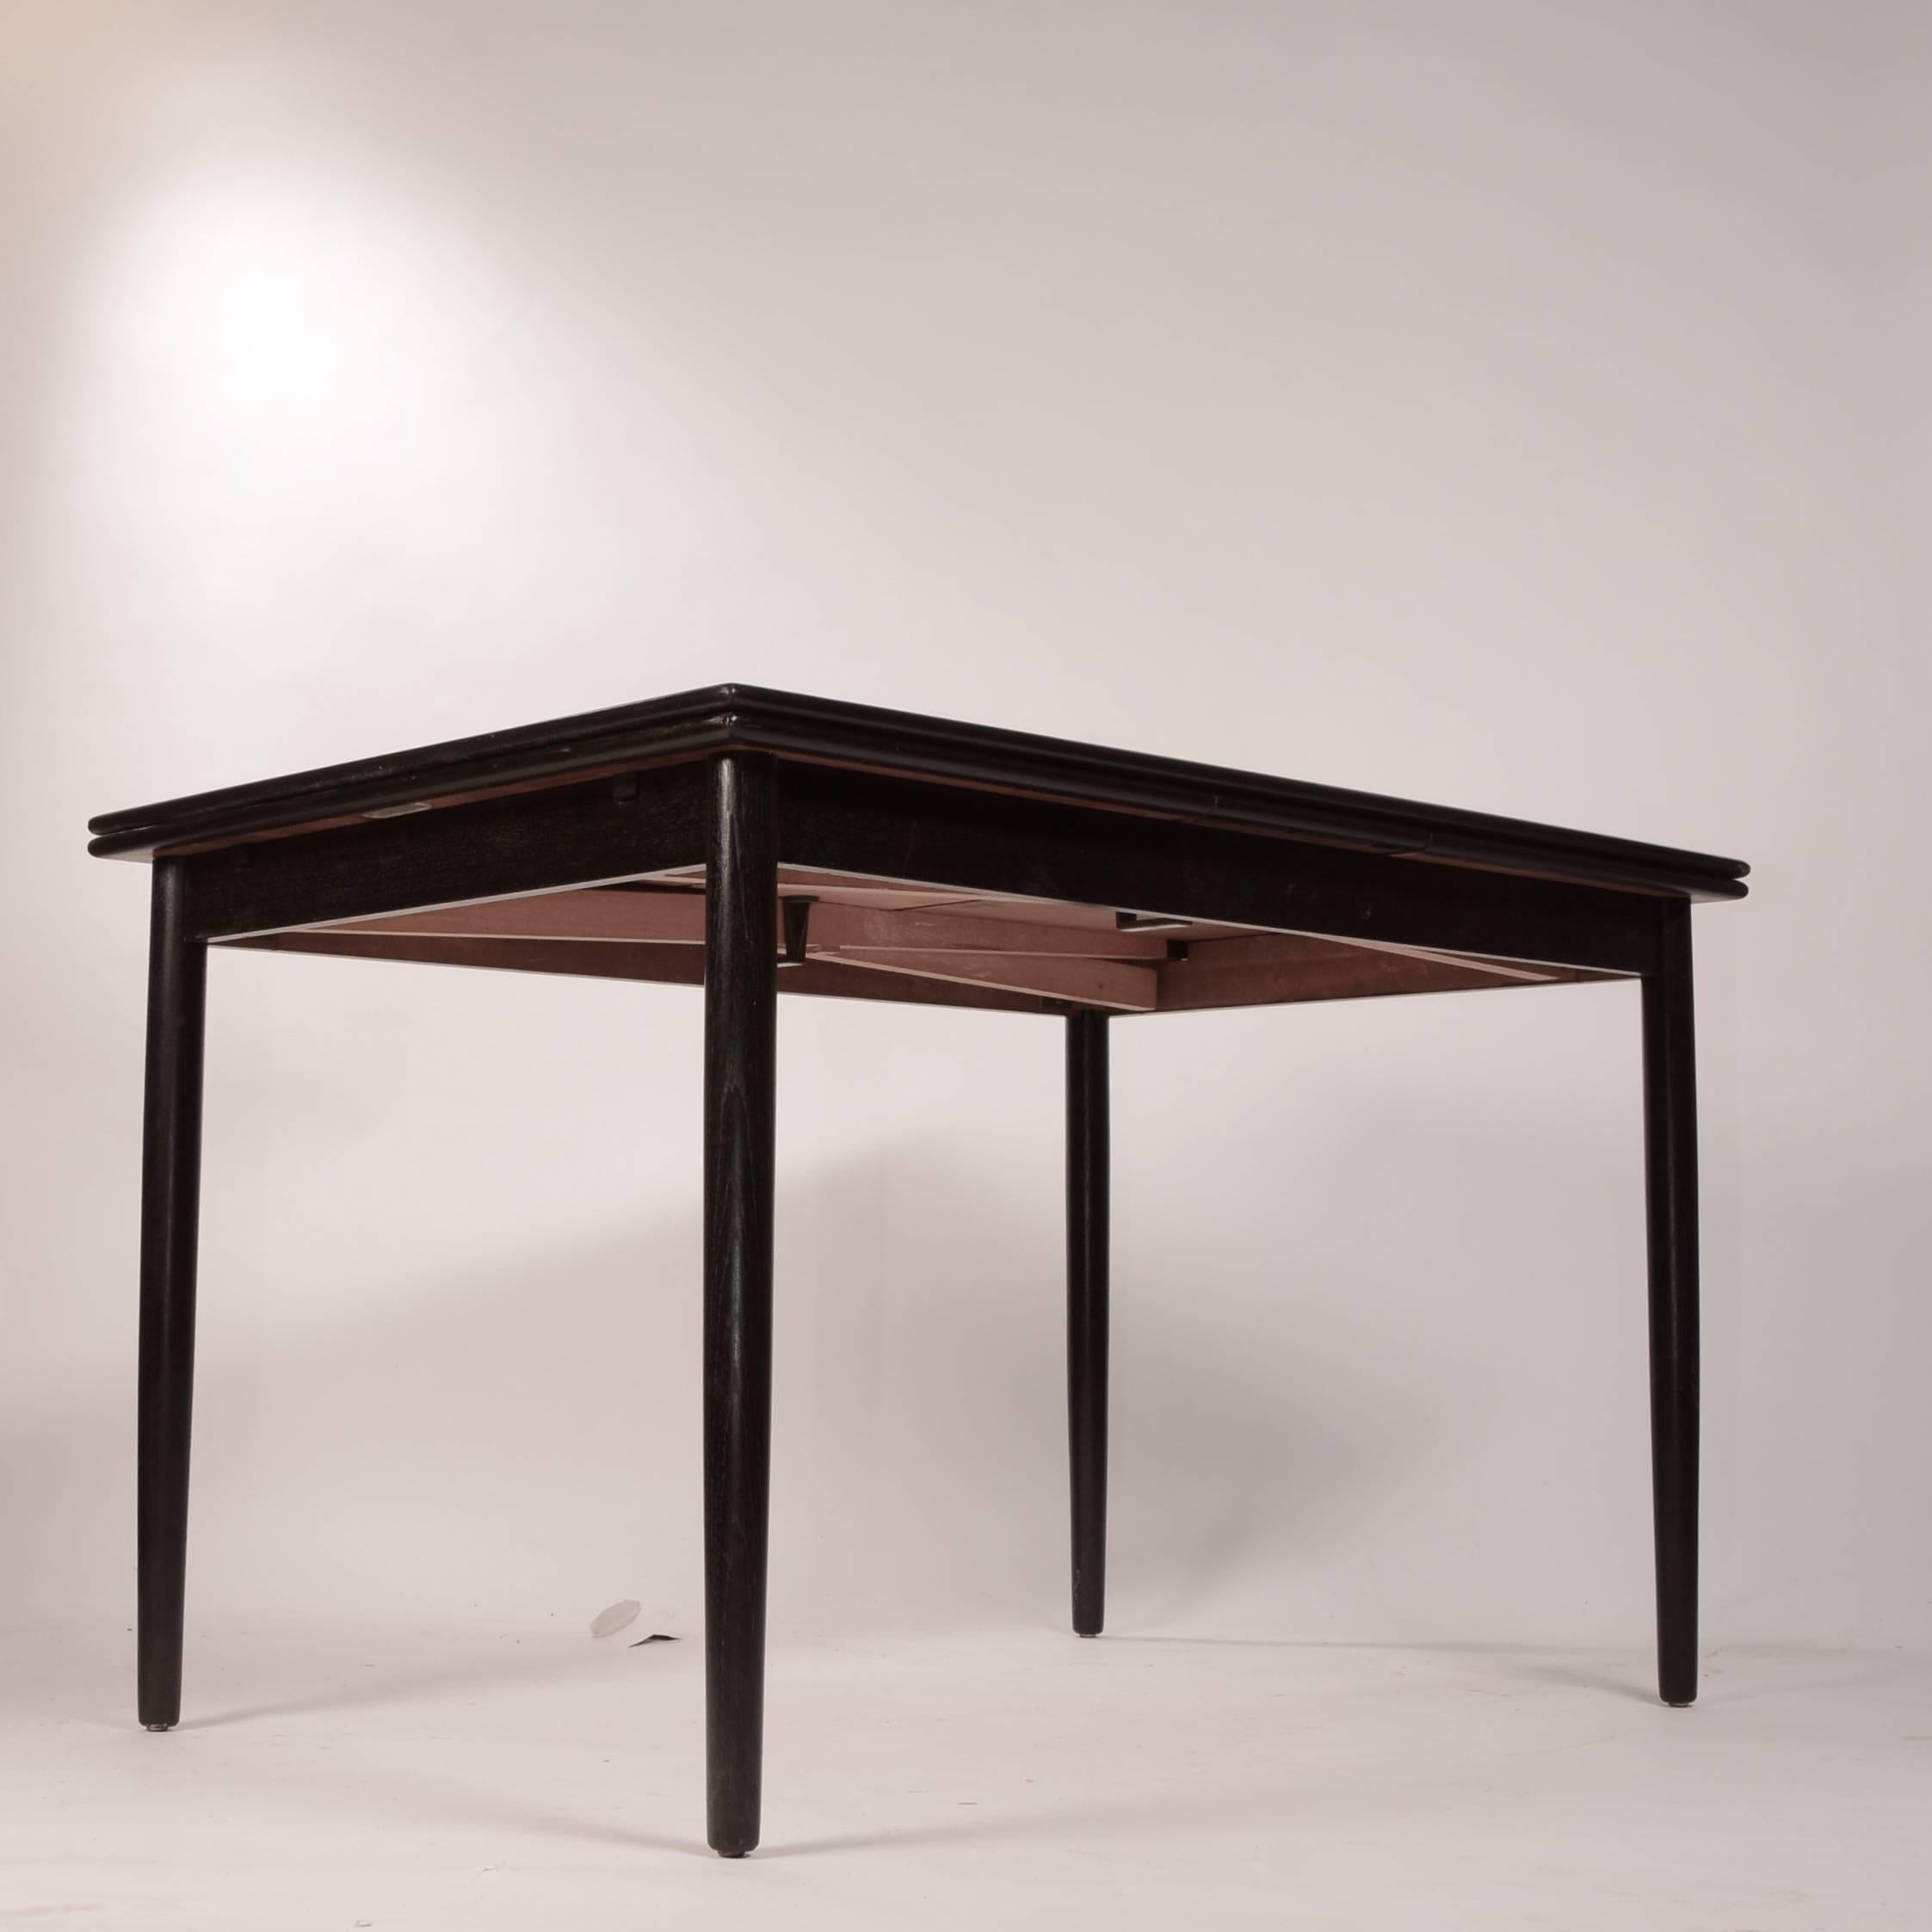 This is a great Danish modern draw-leaf dining table newly ebonized black. The leaves pull-out with easy. In excellent refinished condition. Measure: Total length with leaves pulled out is 84